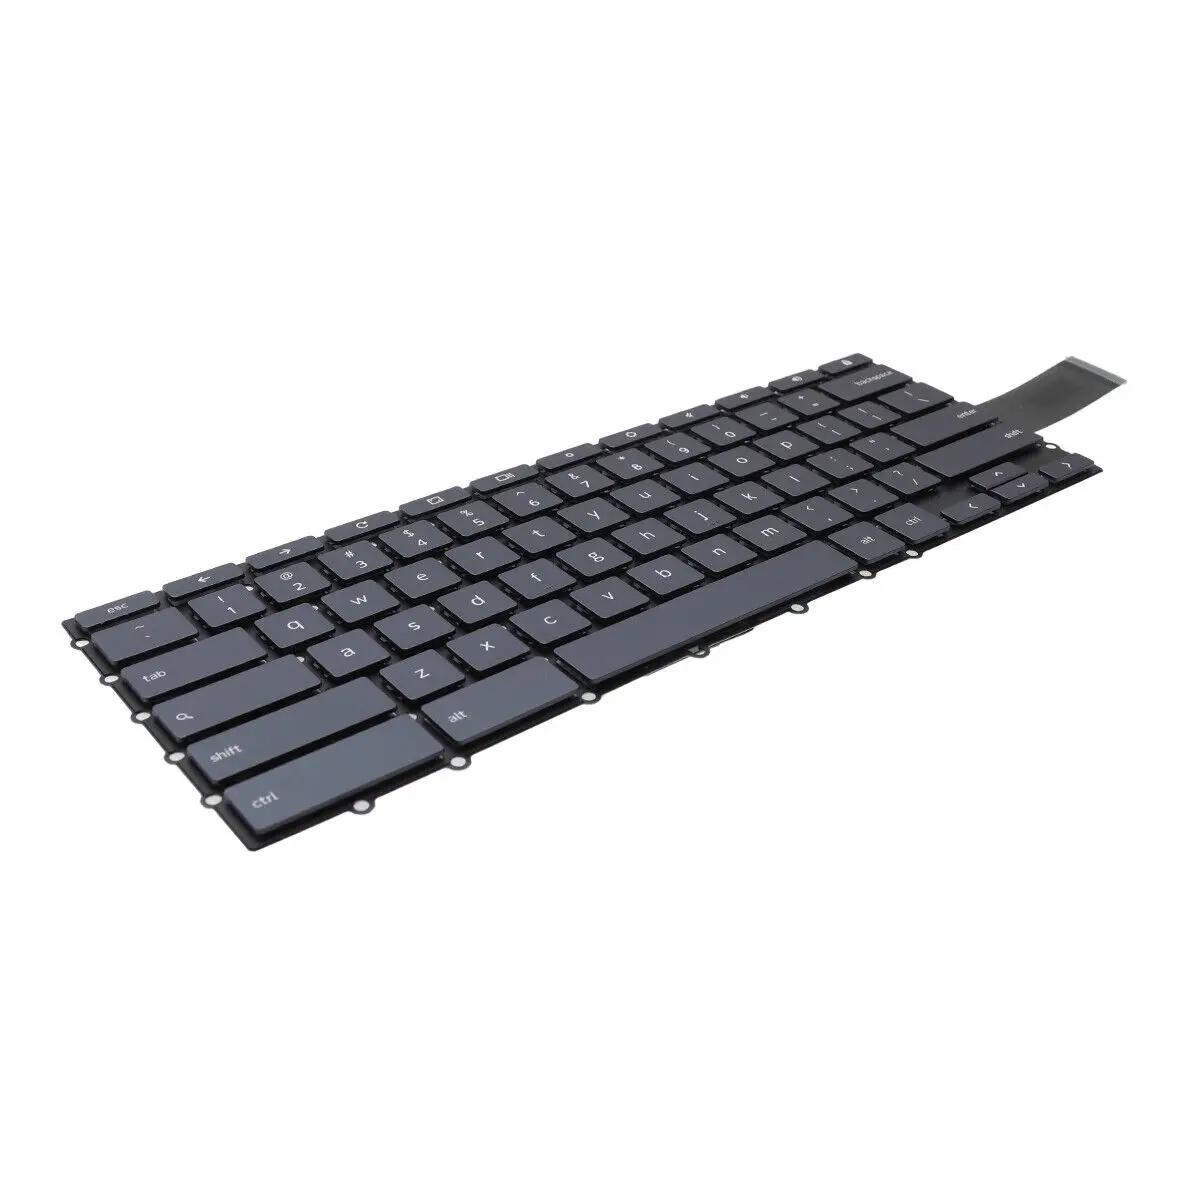 

New English laptop Keyboard for lenovo Chromebook S340-14 S330 US computers keyboards qwerty keycaps Genuine SN20R49156 LCM18B7